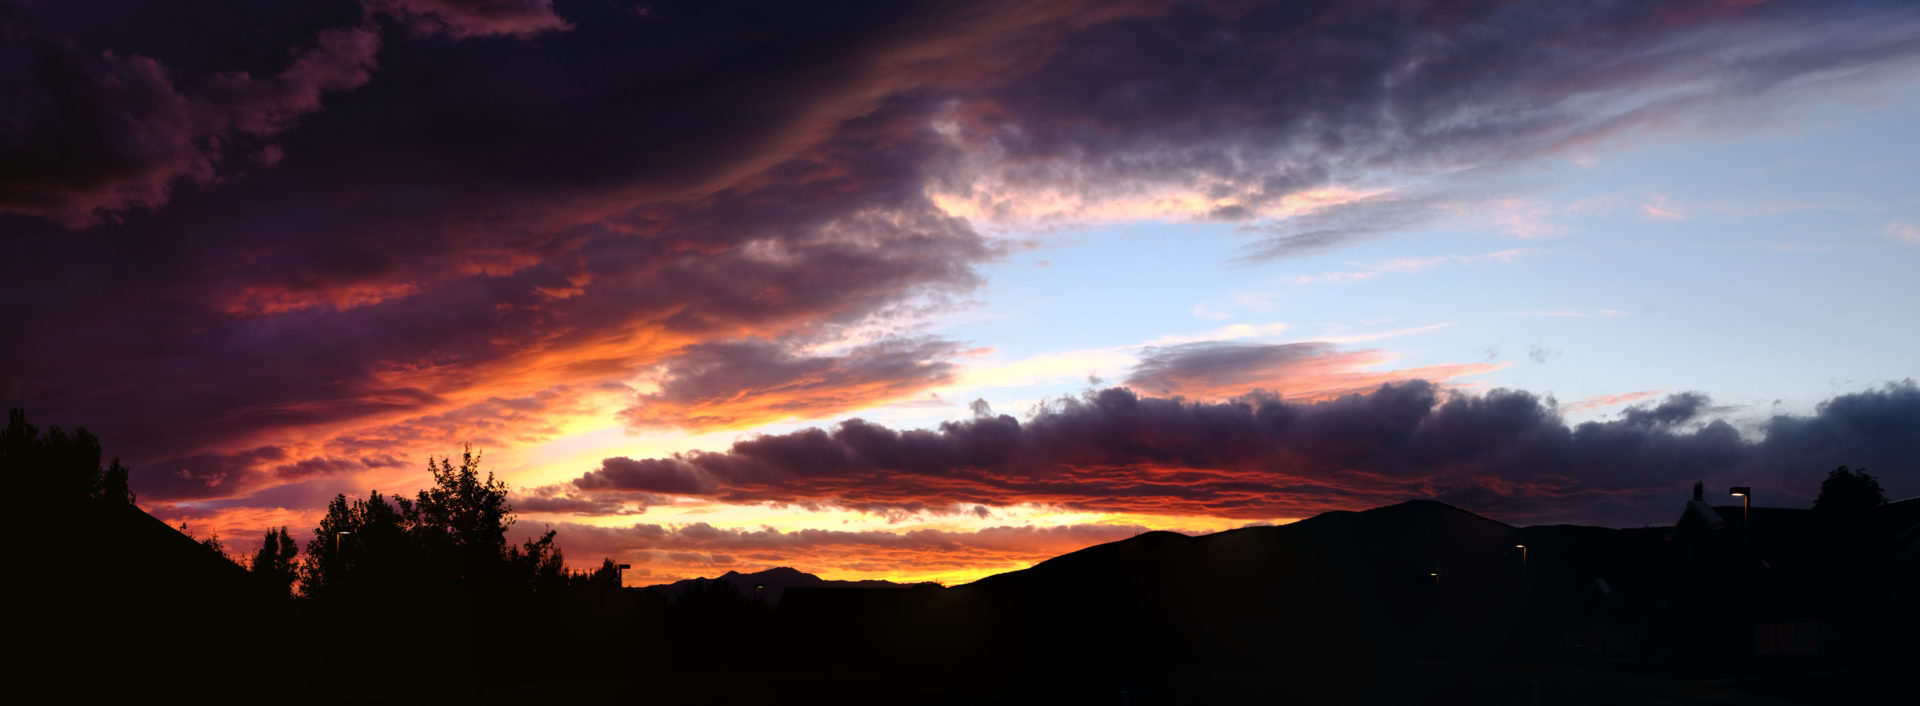 A beautiful sunset panorama filled with purples and oranges and reds from the layers of clouds.